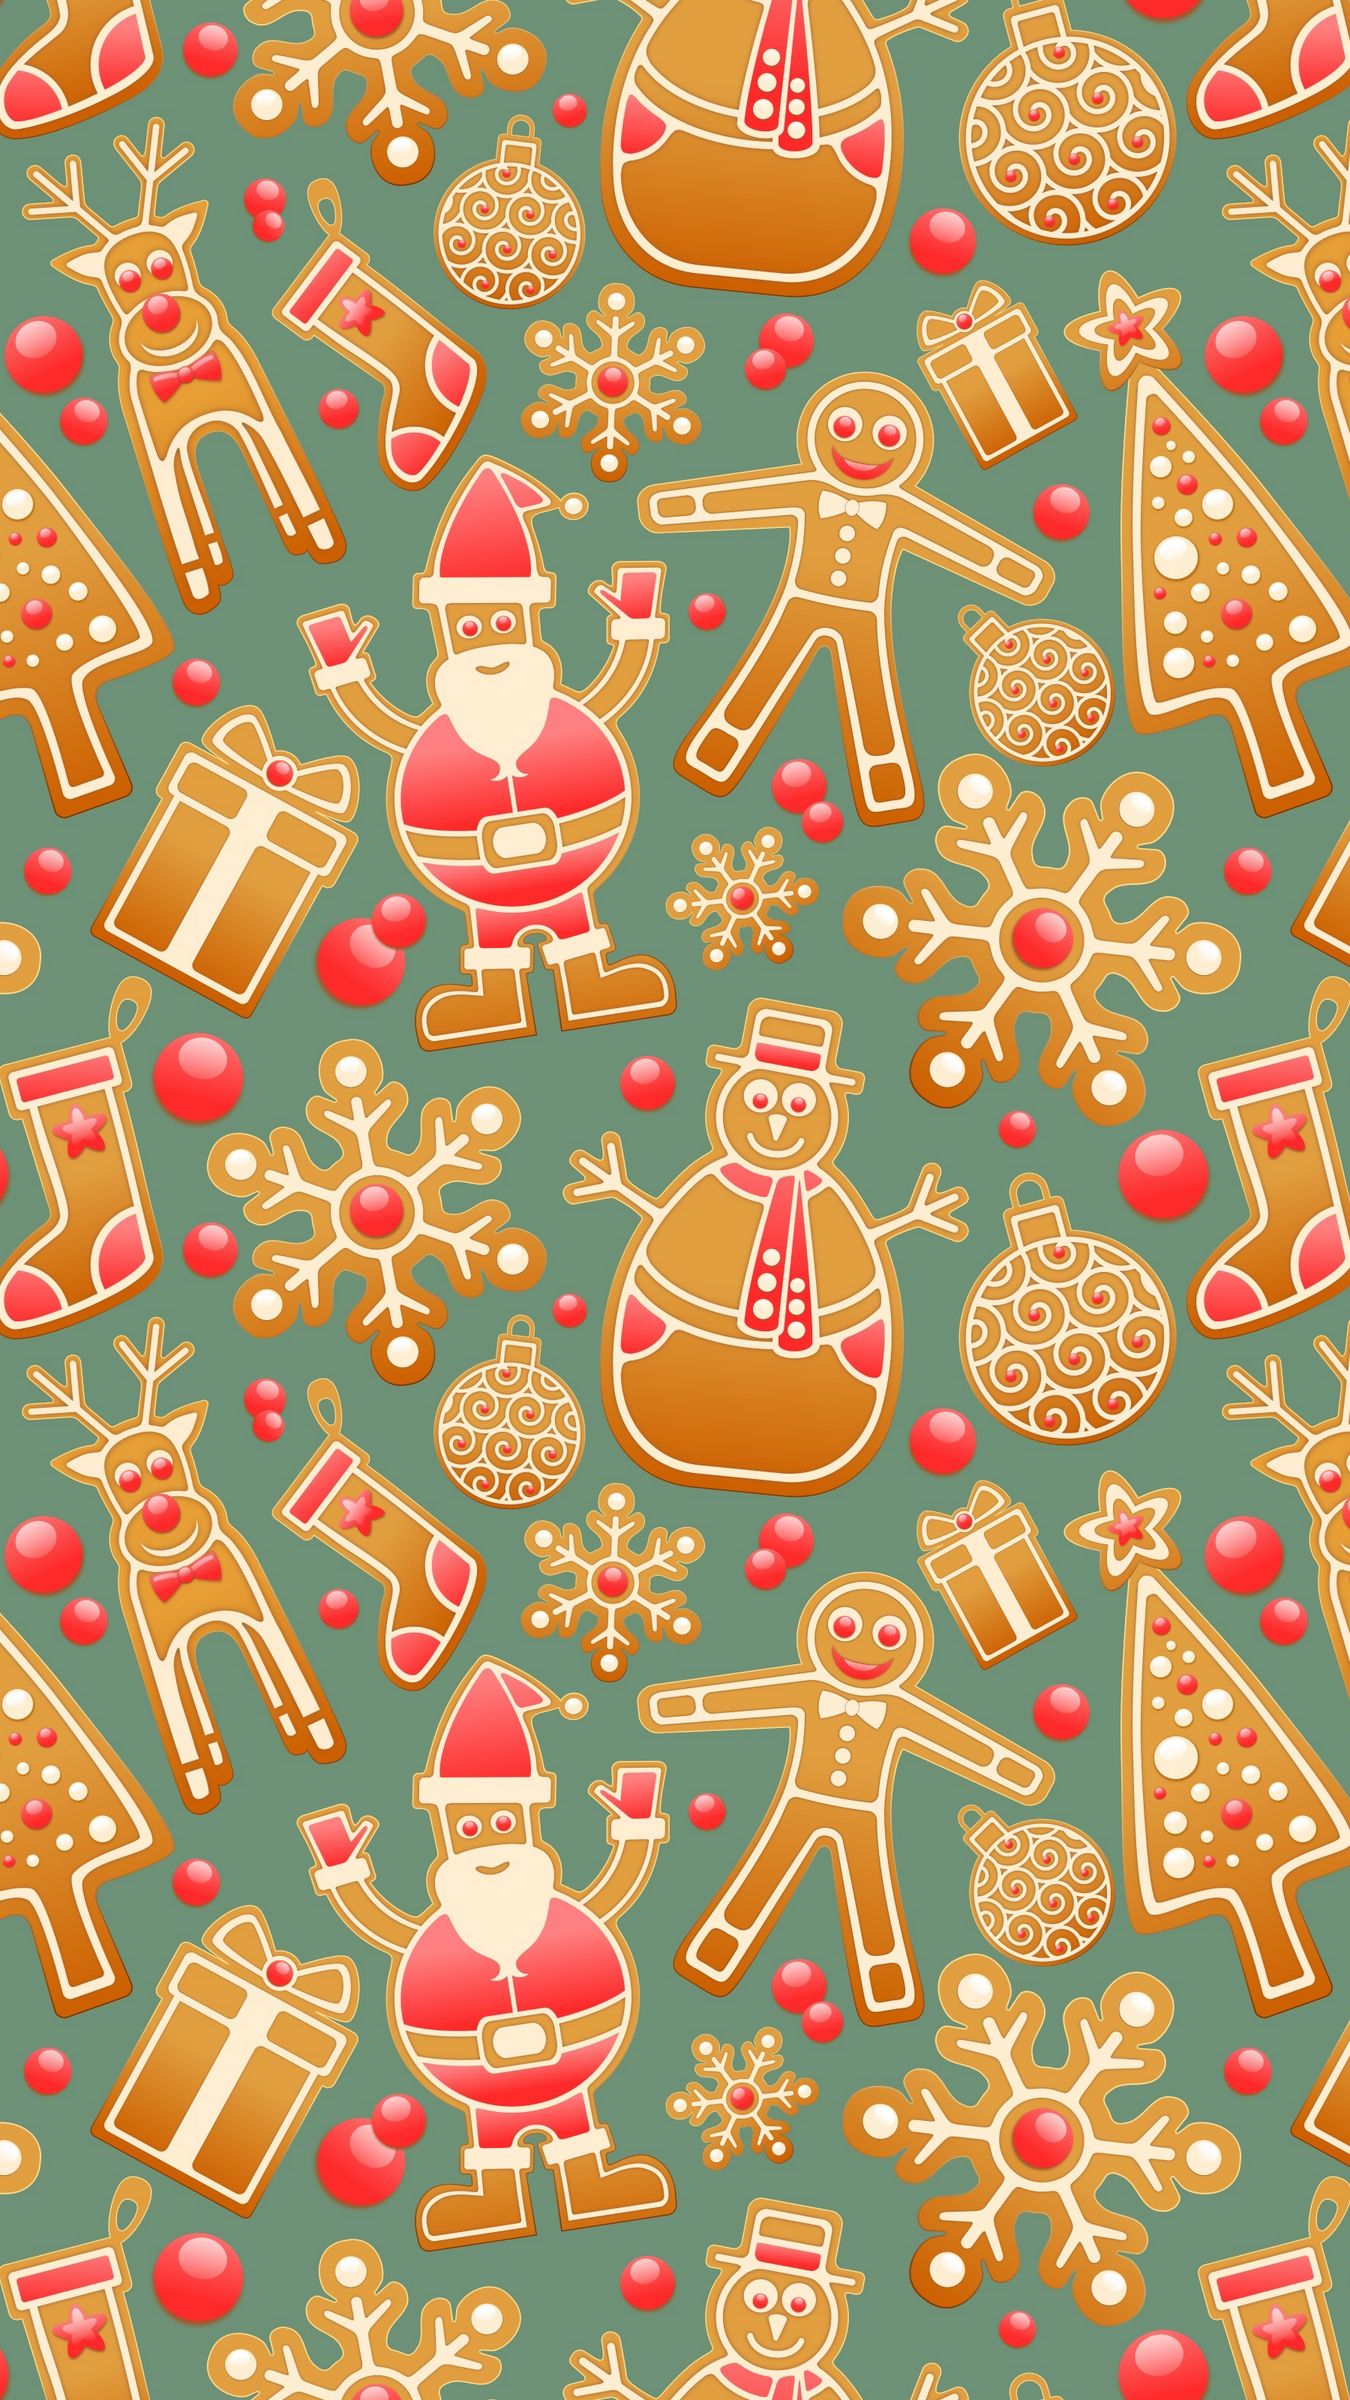 Download wallpaper 1350x2400 christmas, new year, gingerbread, snowman, santa claus iphone 8+/7+/6s+/for parallax HD background